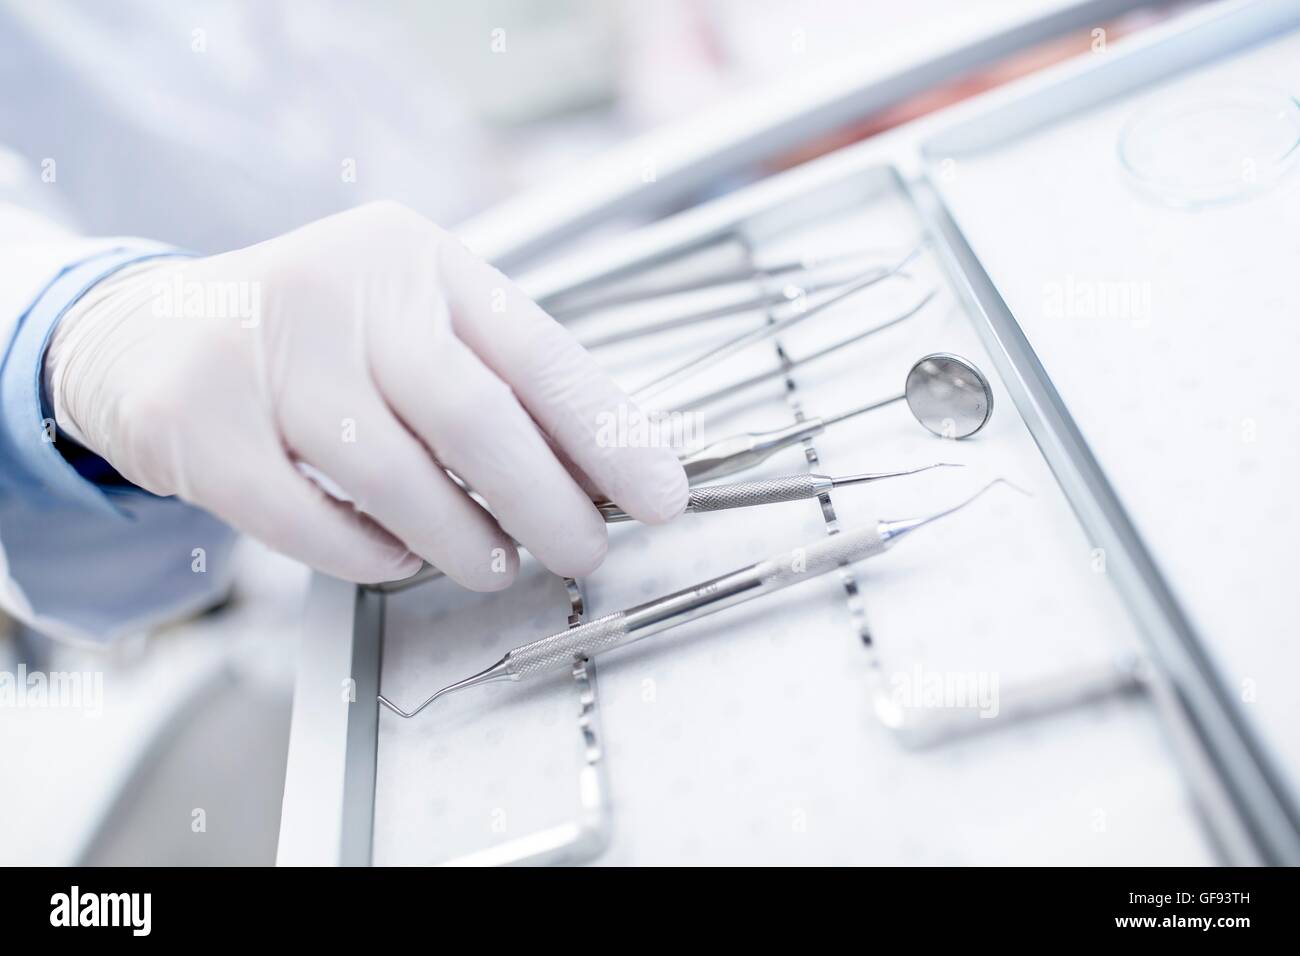 MODEL RELEASED. Close-up of dental equipment in doctor's hand. Stock Photo